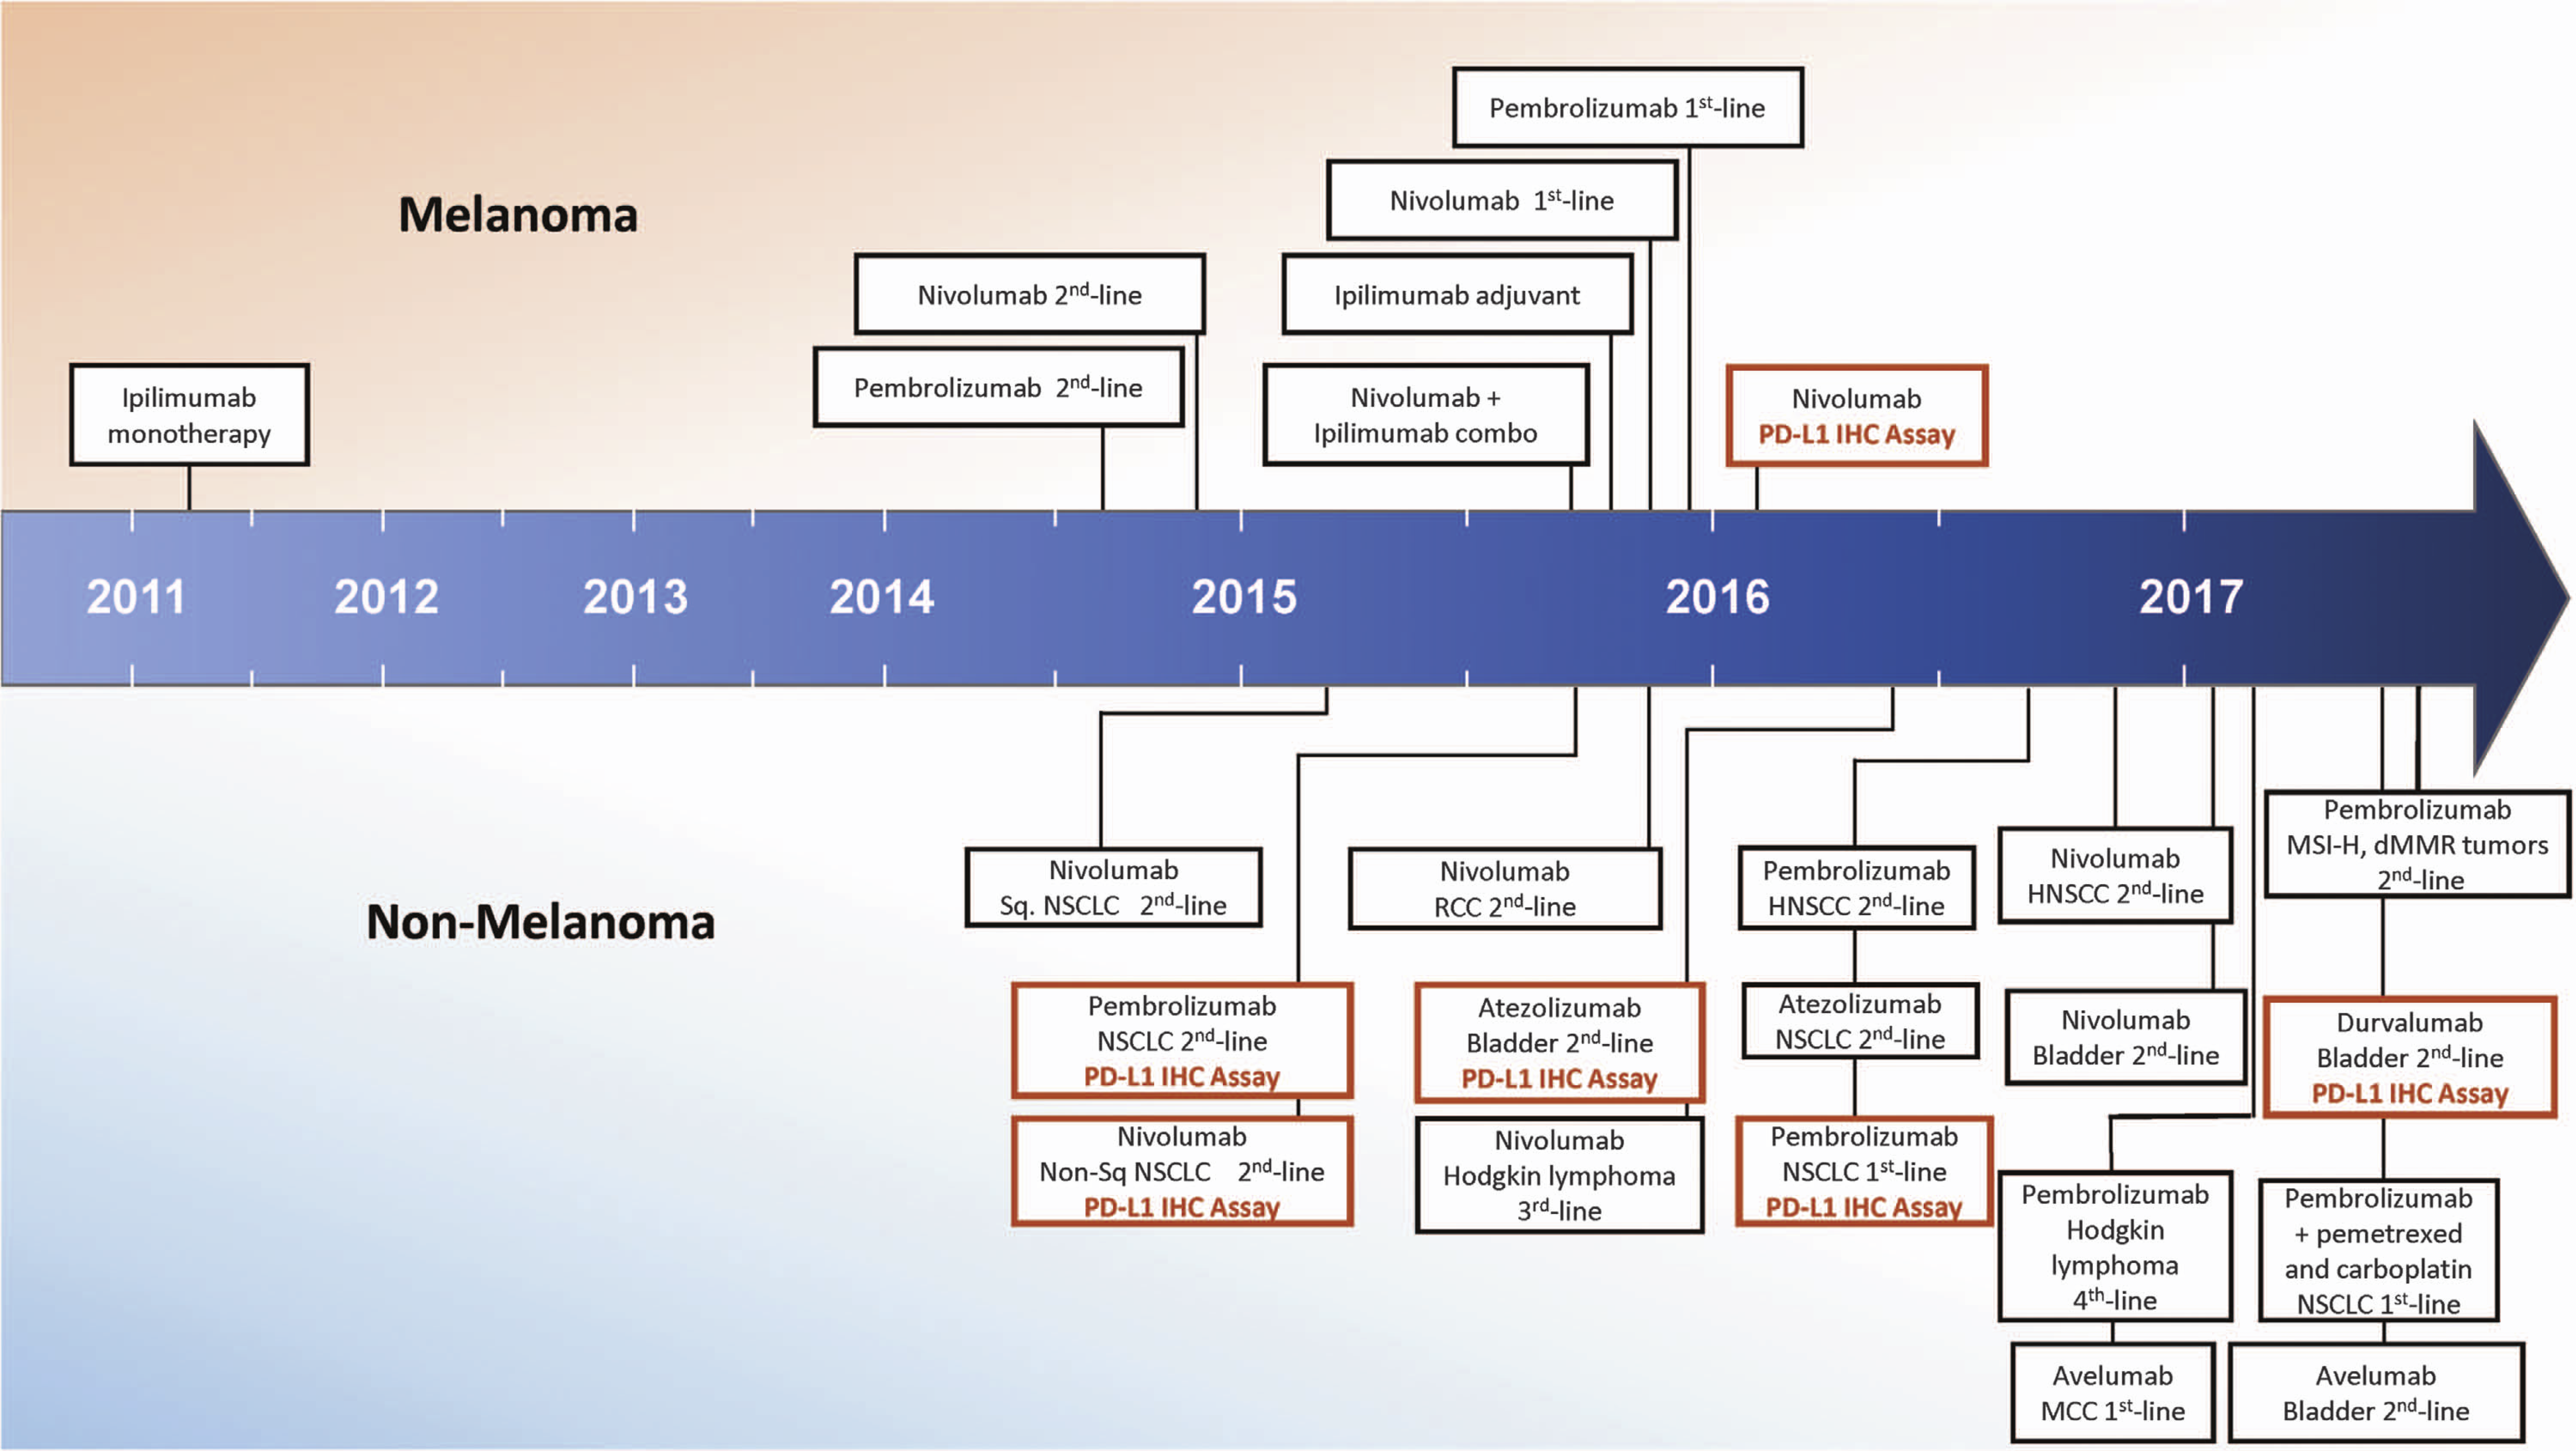 This timeline describes short history of FDA approval of checkpoint blocking immunotherapies up to 2017. Reprinted by permission from Springer Nature (Taube et al. 2017) Macmillan Publishers Limited, part of Springer Nature. All Rights Reserved.